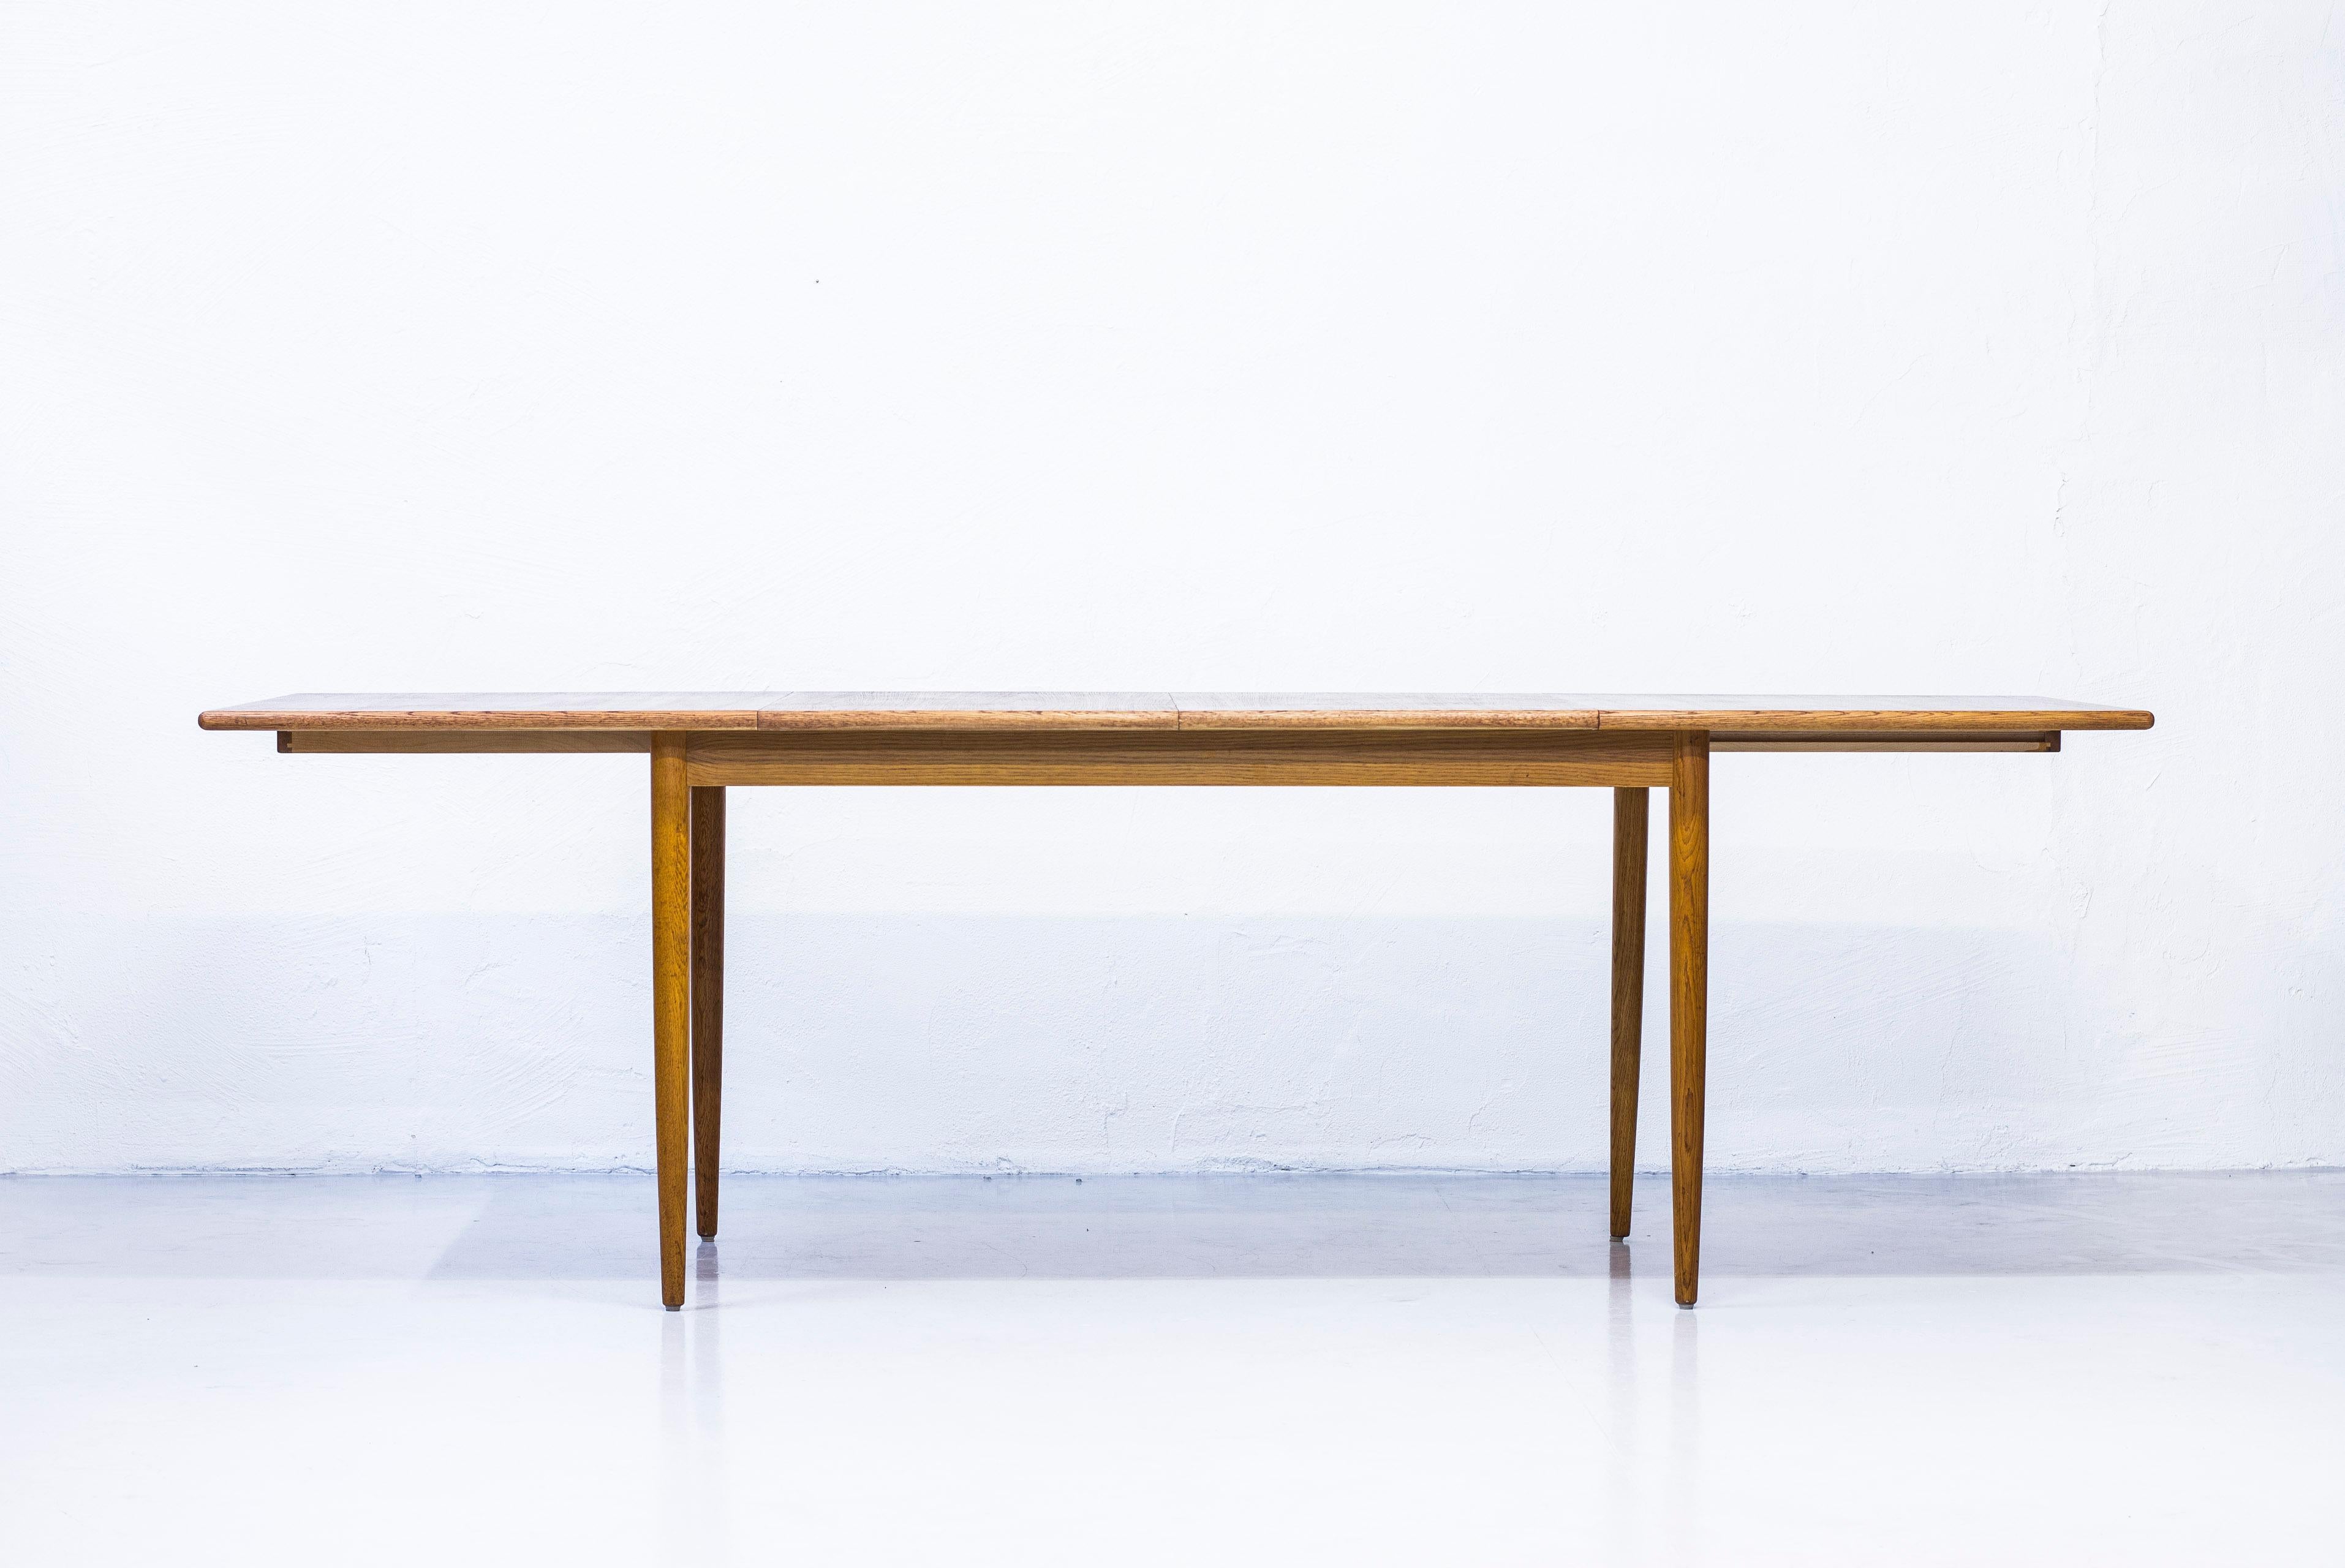 Dining table designed by Karl-Erik Kulén. Produced in Sweden by Bodafors in 1960. Solid tapered oak legs and sides and edge in oak. Tabletop with teak wood. Very good condition with light age related wear and patina. With two leafs for extension up